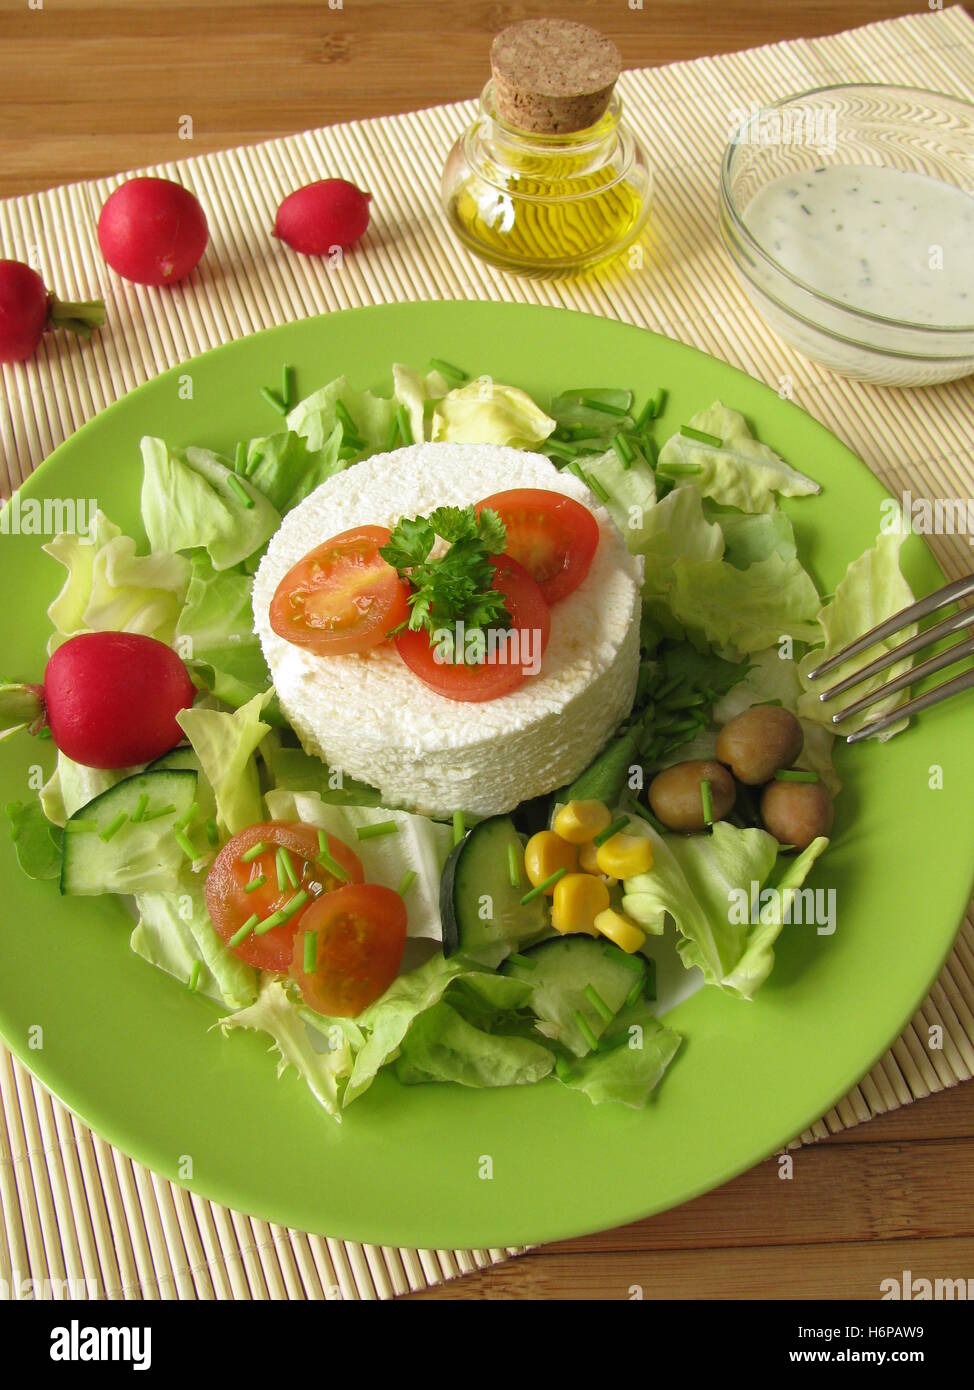 goat cheese on salad Stock Photo